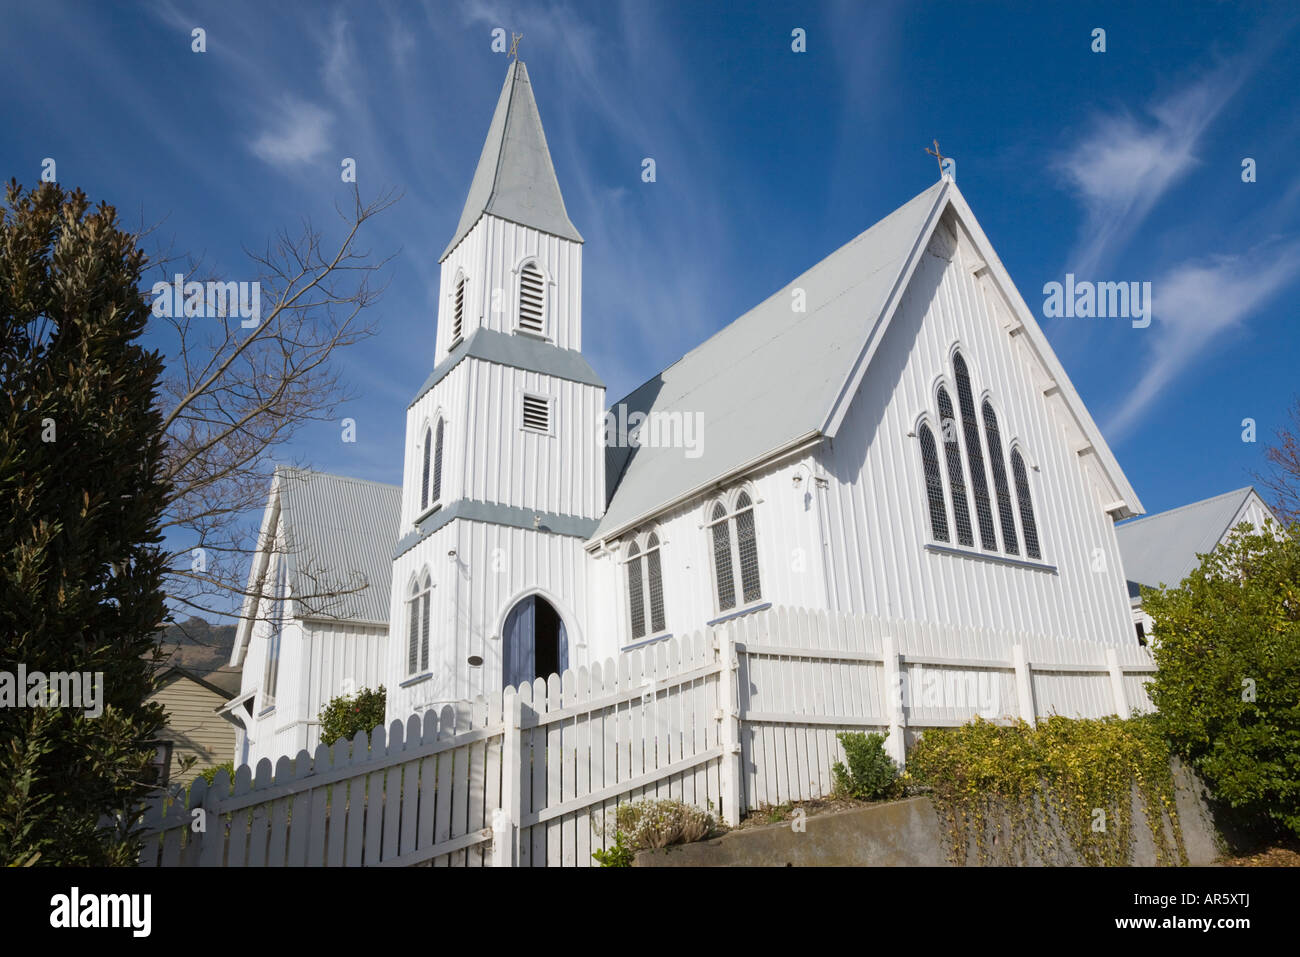 Akaroa 'Banks Peninsula' South Island New Zealand May Anglican Church of St Peter white wooden clapboard building 1864 Stock Photo